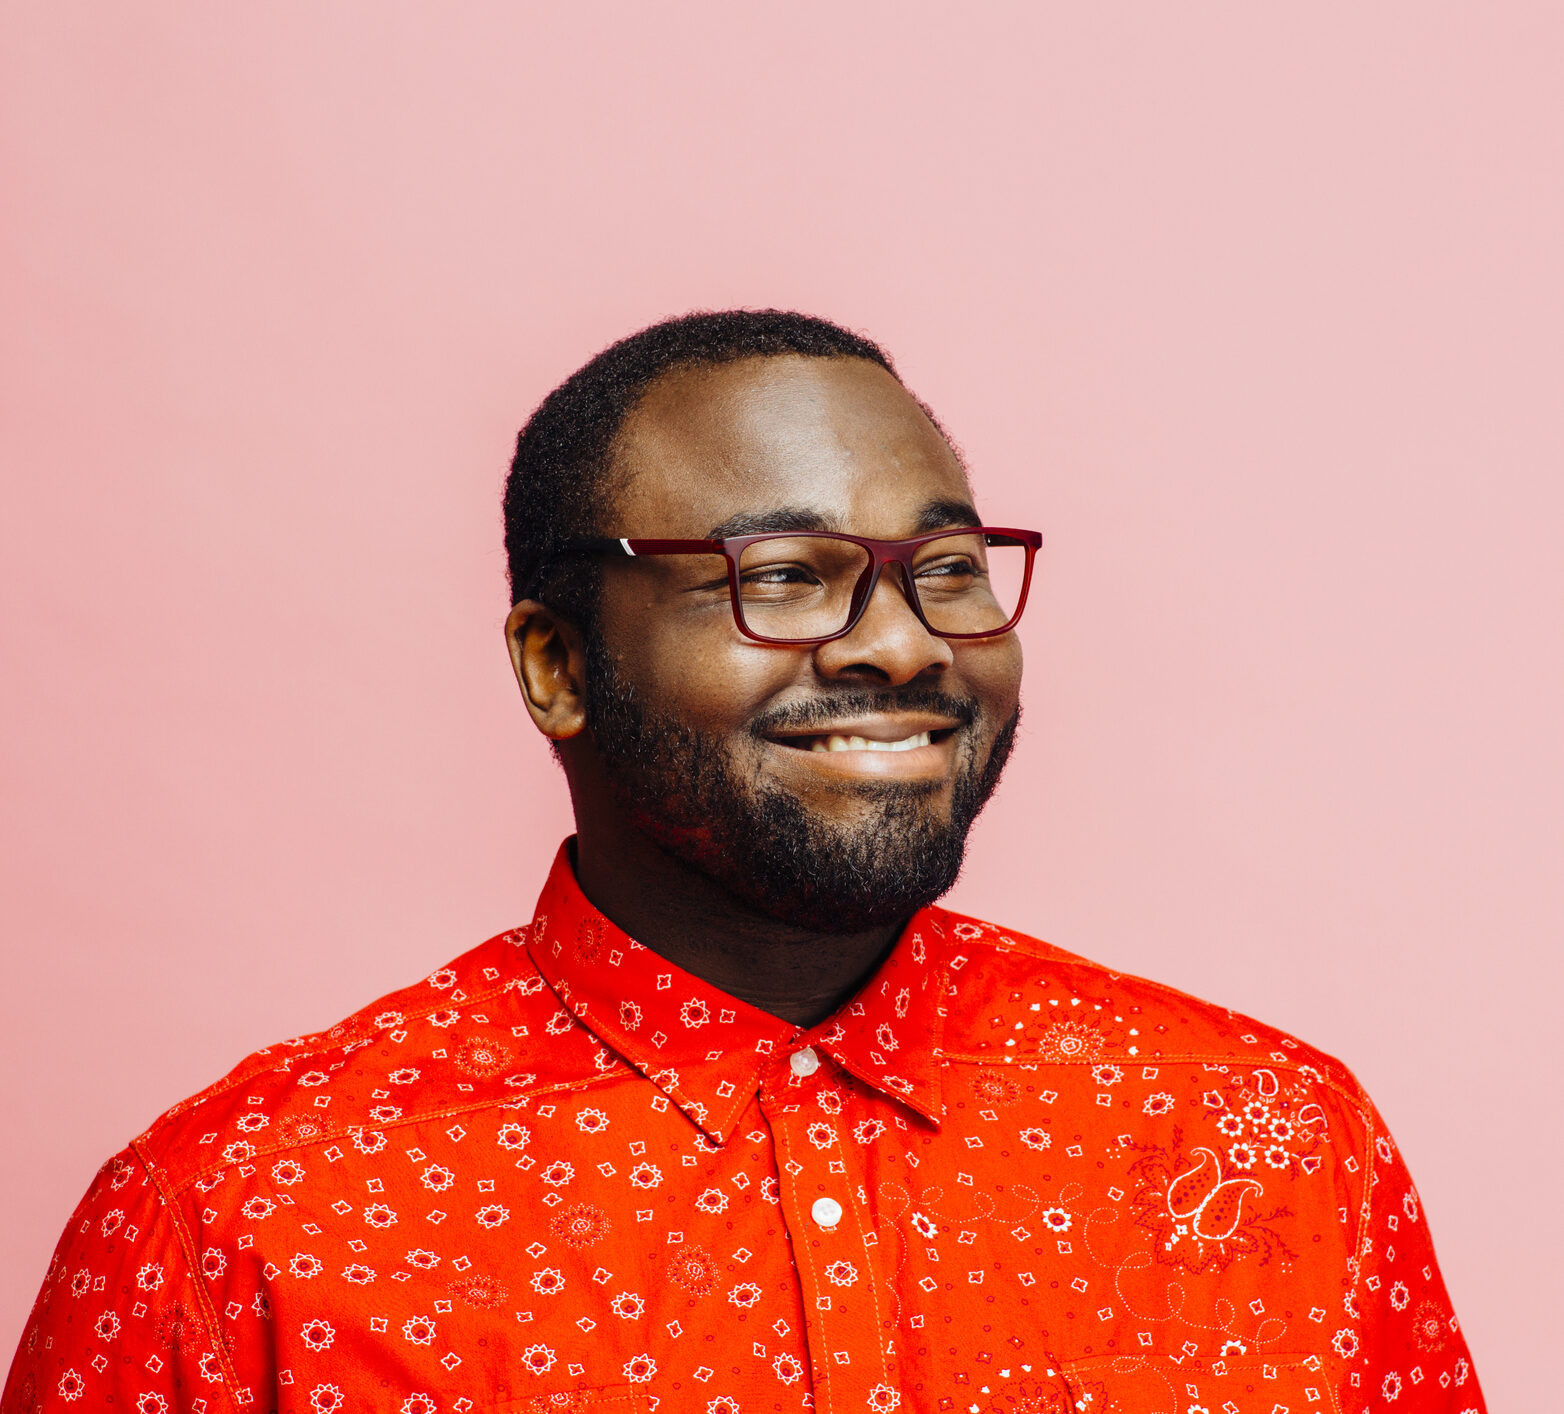 Man in bright red shirt and glasses smiling and looking off camera against pink background. He is happy to learn about time in range